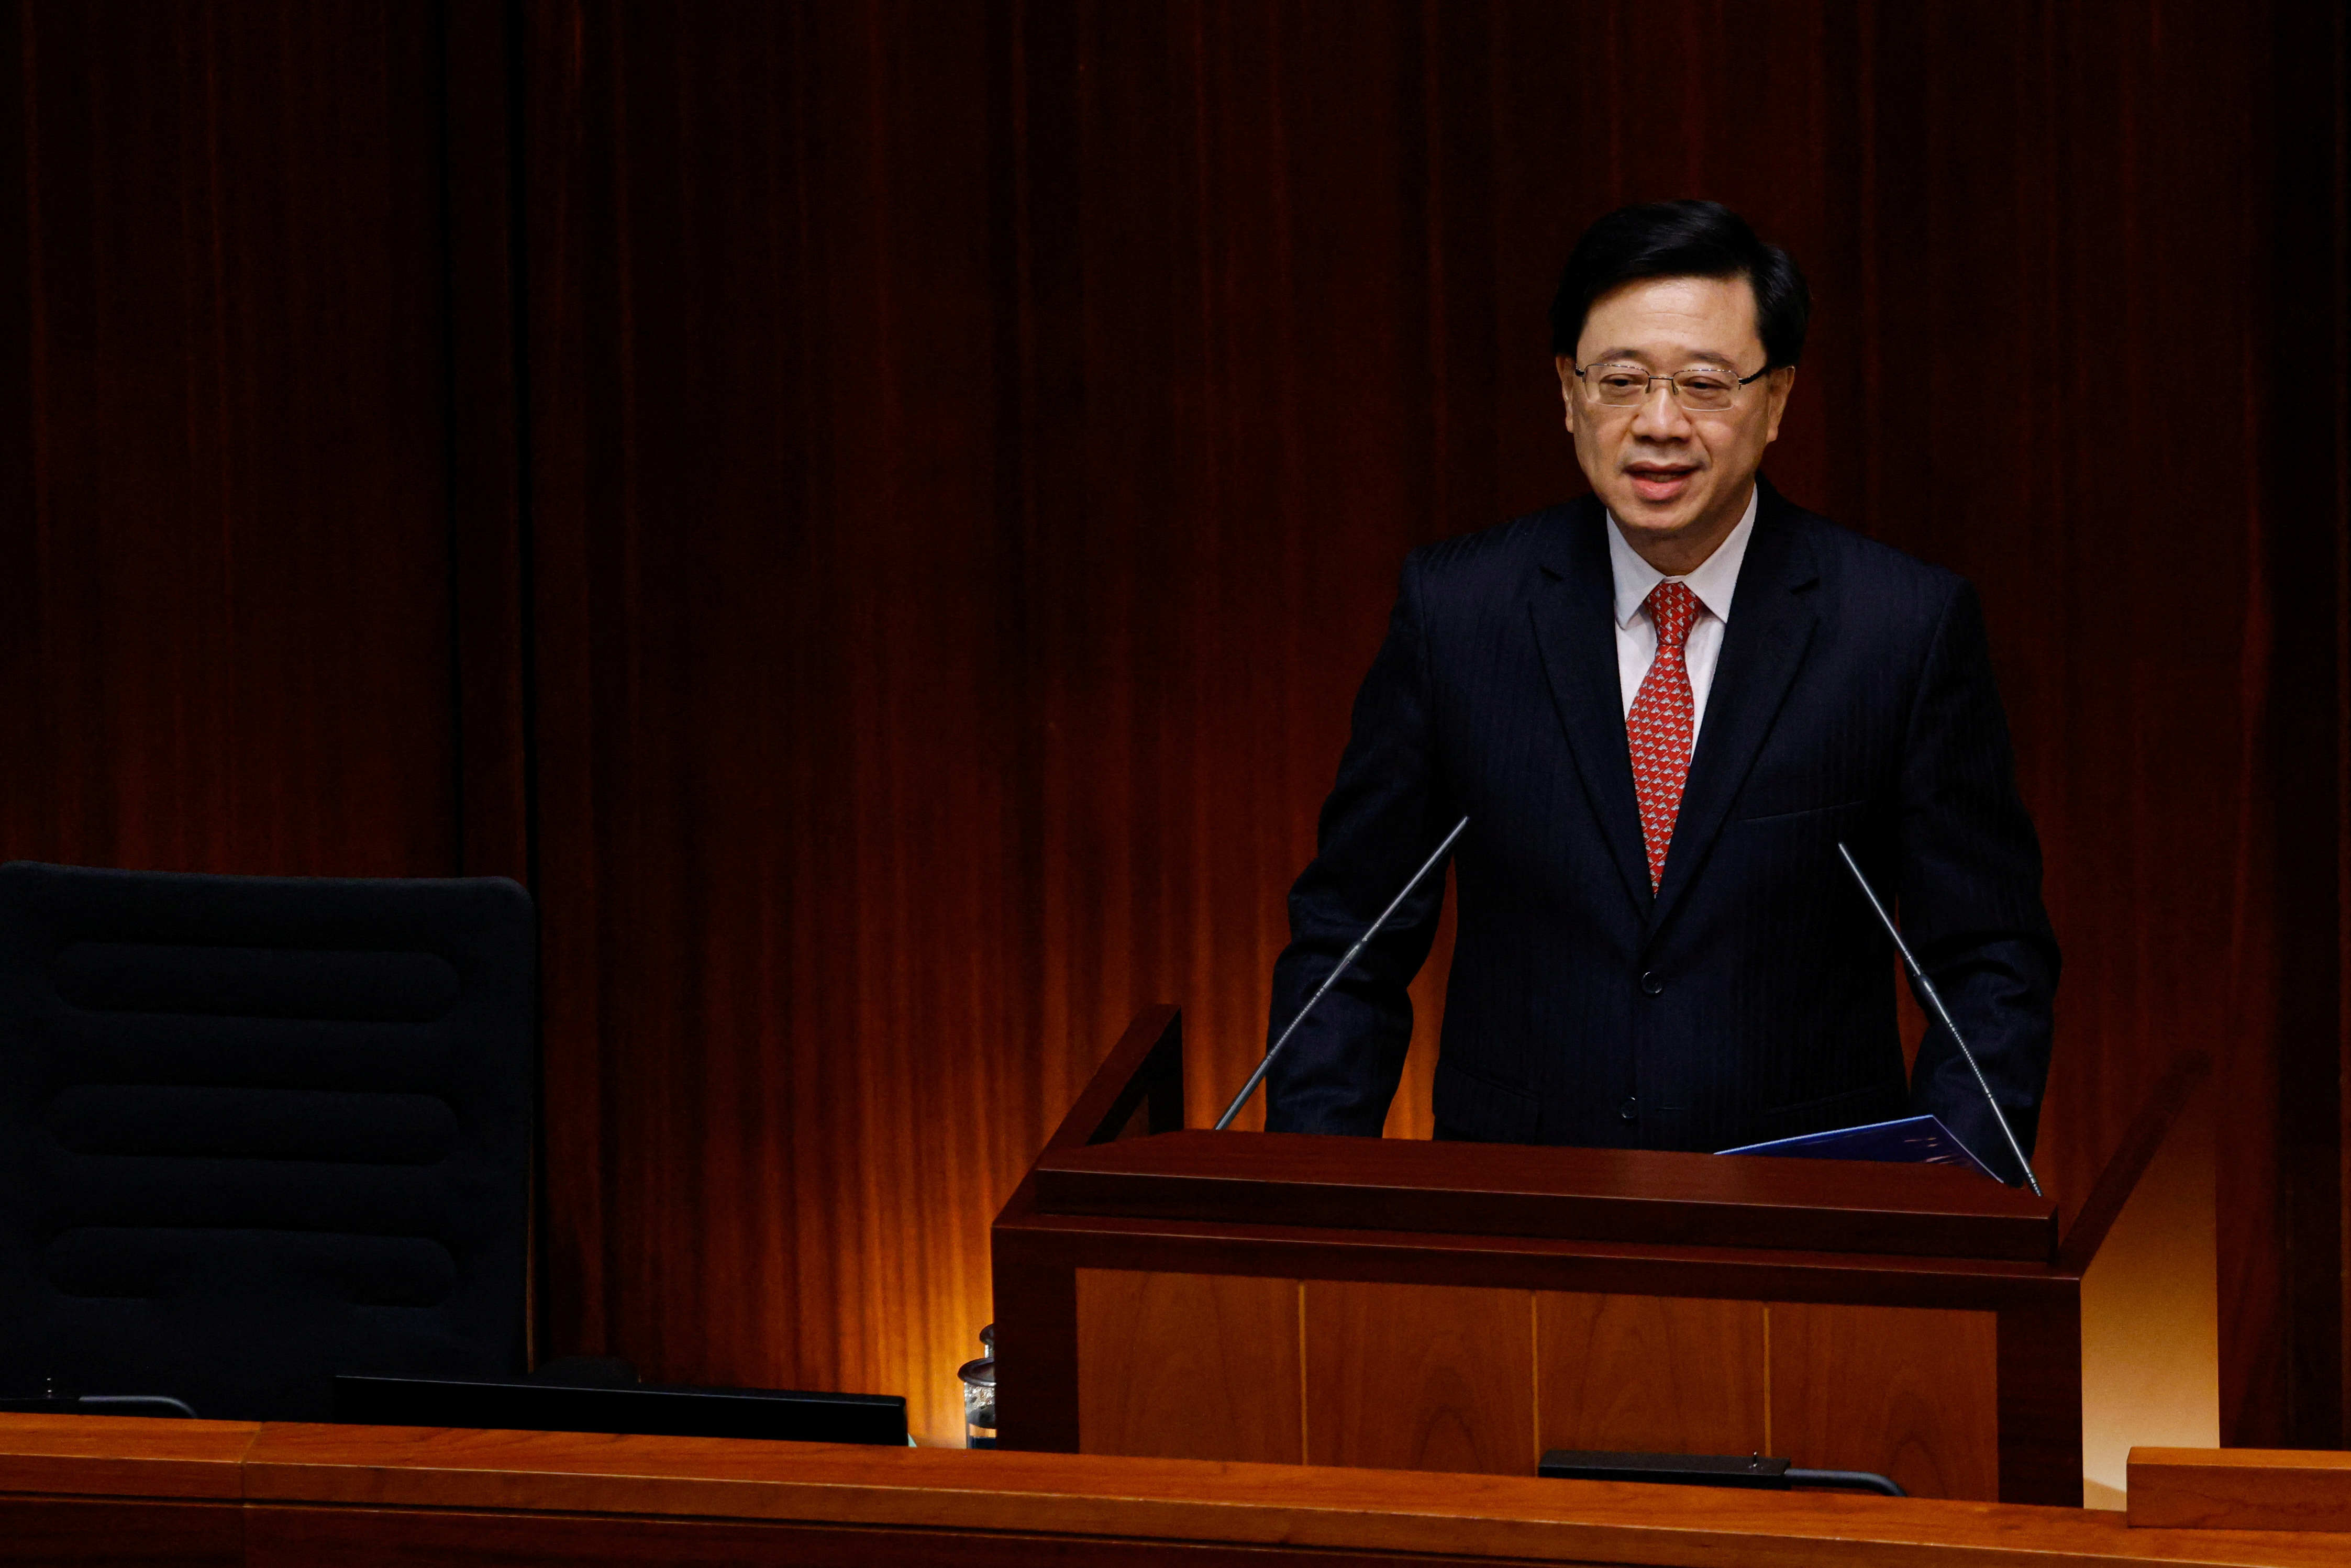 Business leaders say new Hong Kong chief must open up city, rebuild its  image